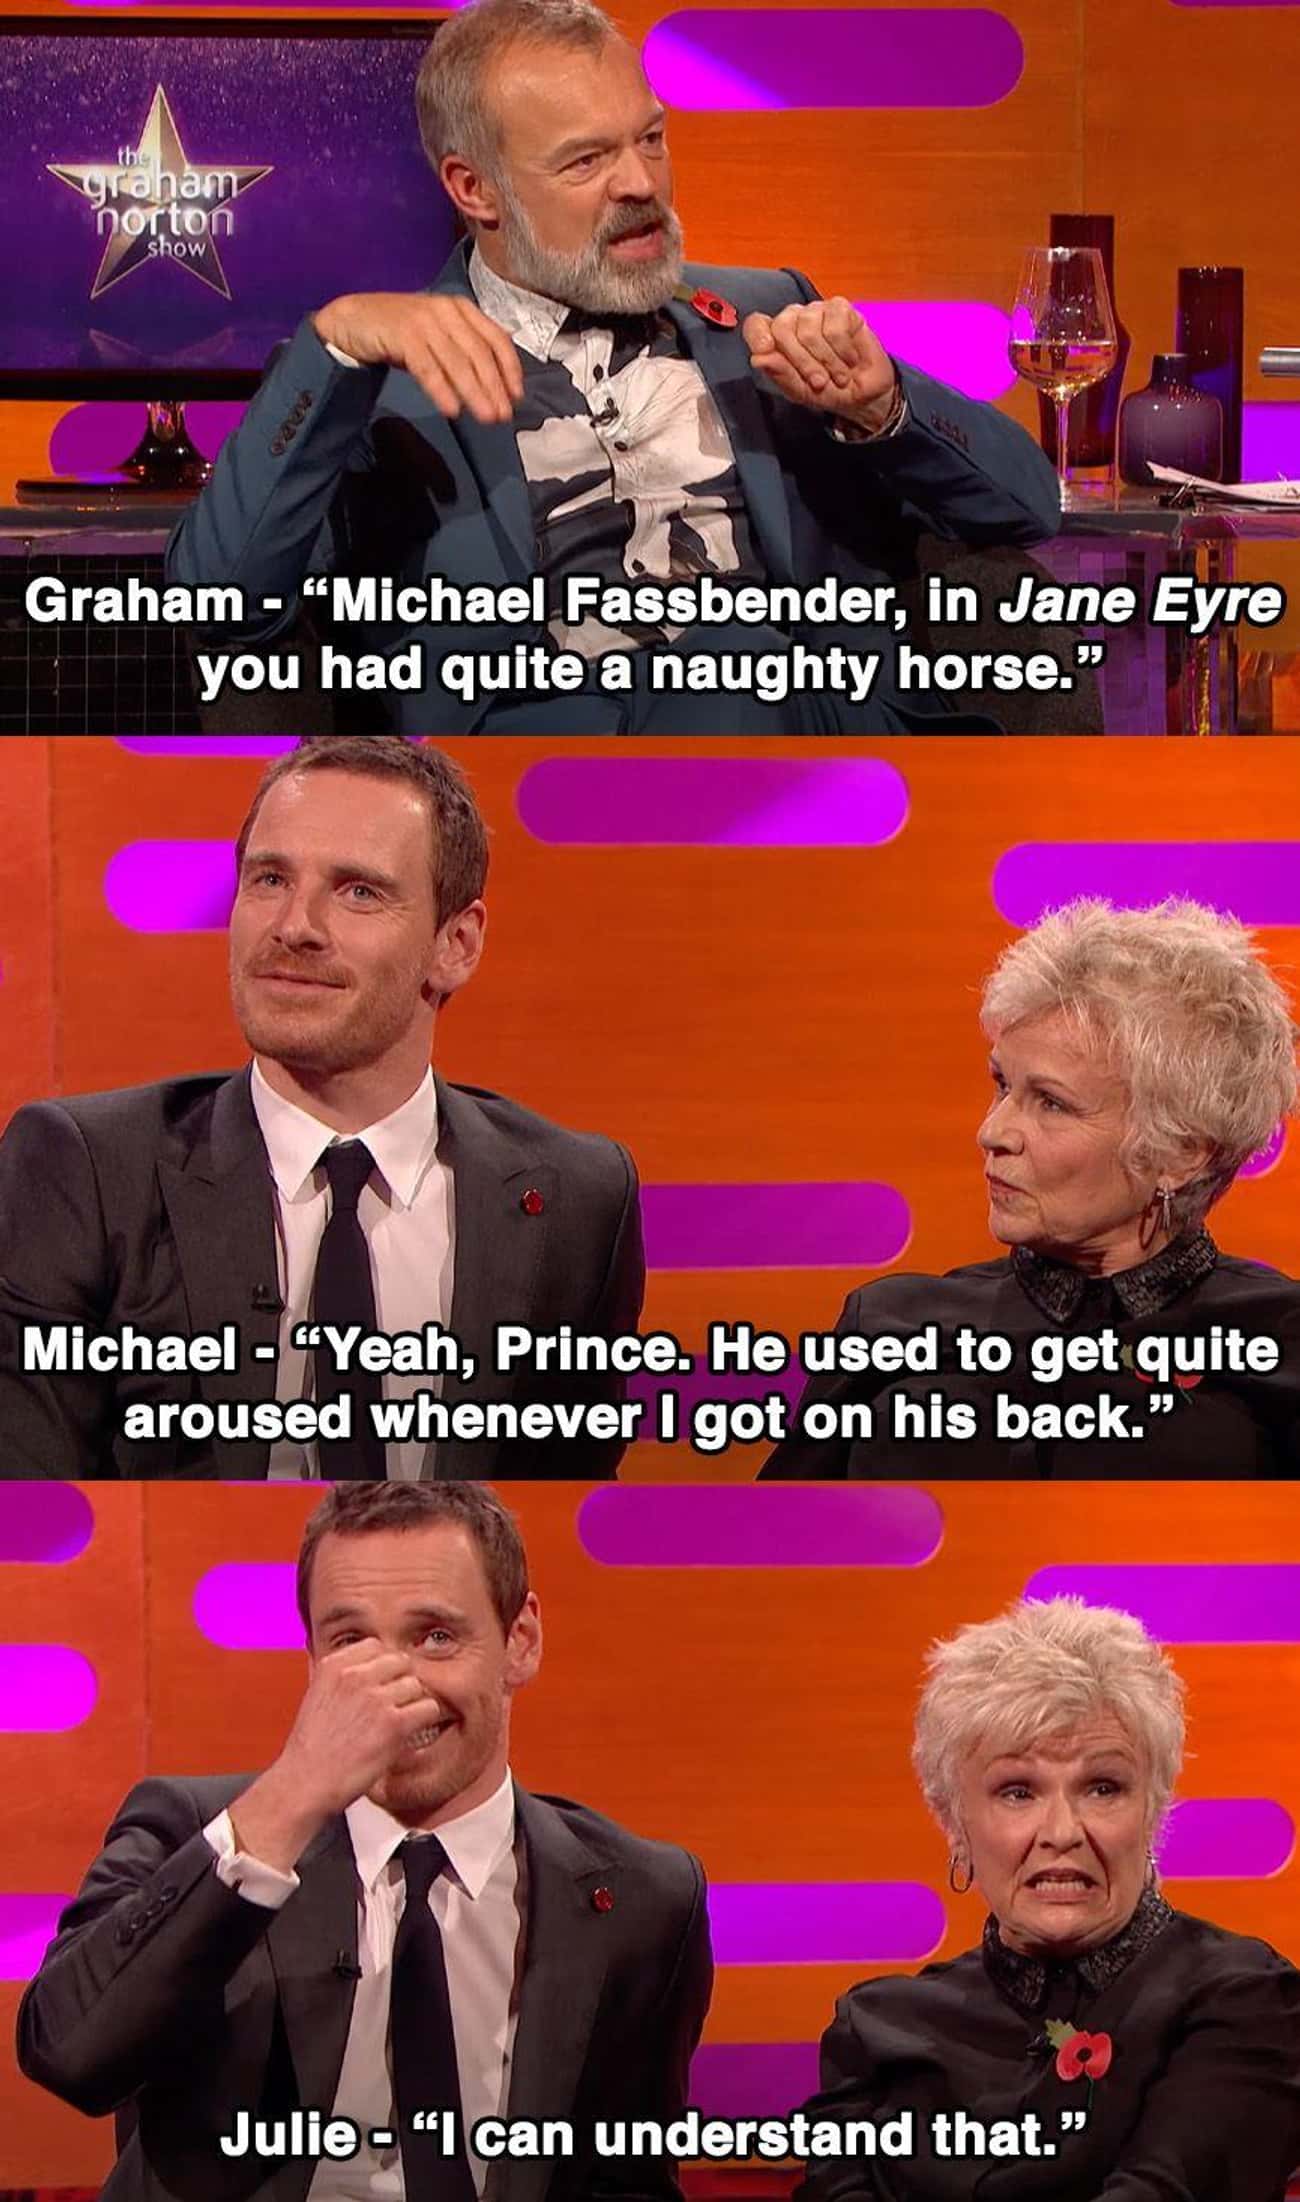 Julie Walters Understands Why Michael Fassbender's Horse Was Aroused